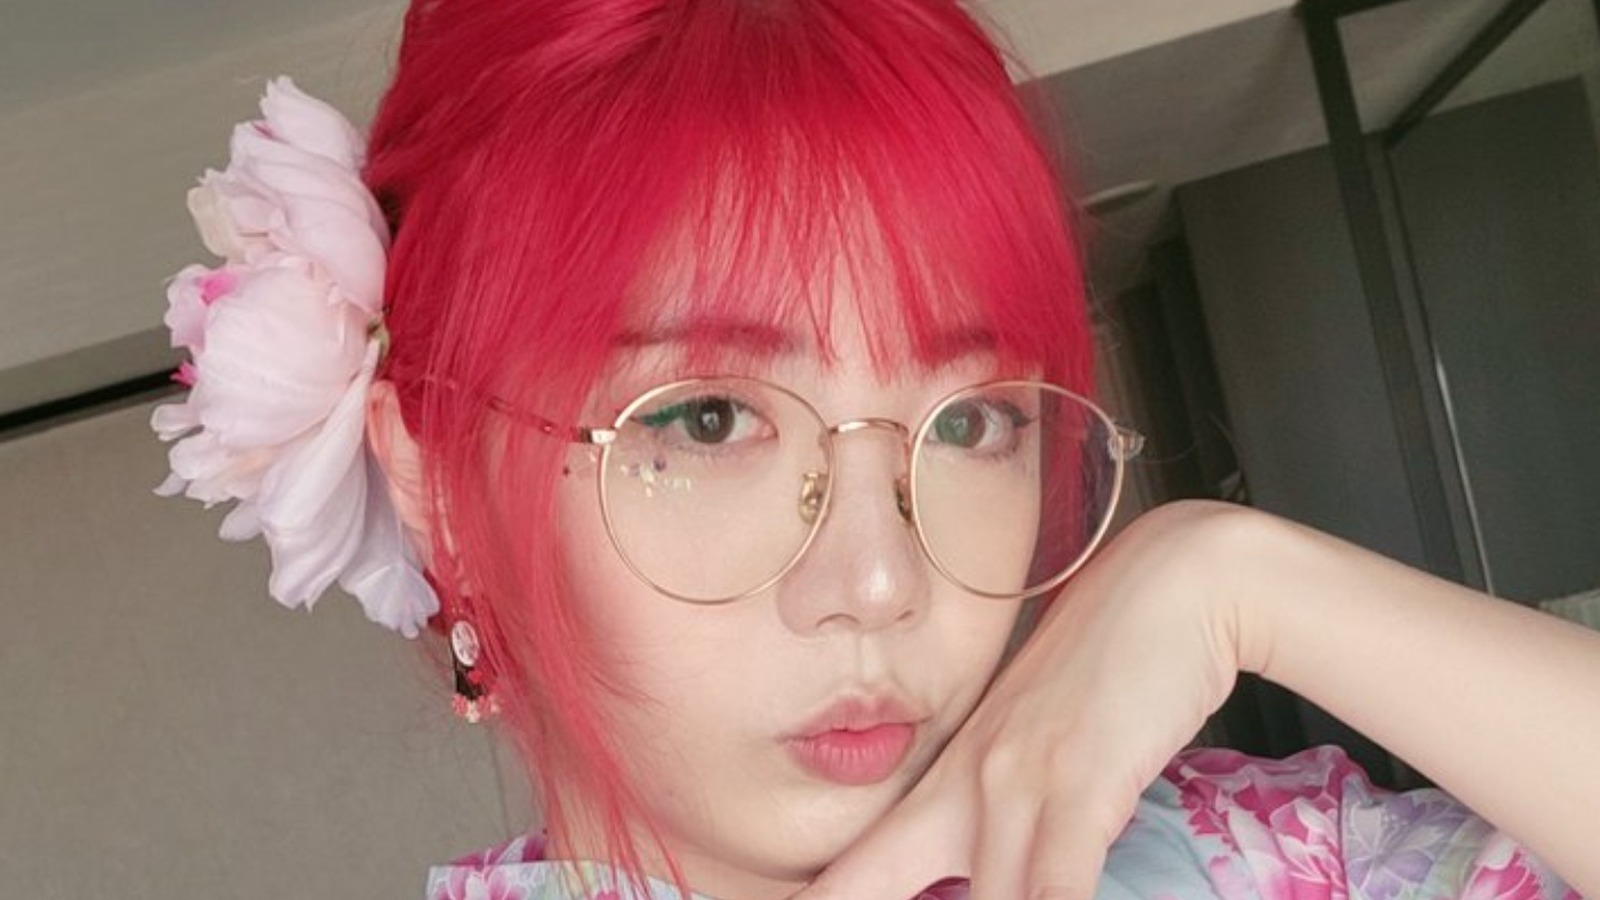 på vegne af Taiko mave Salme LilyPichu Reveals The Harsh Truth About Her Genshin Impact Earnings